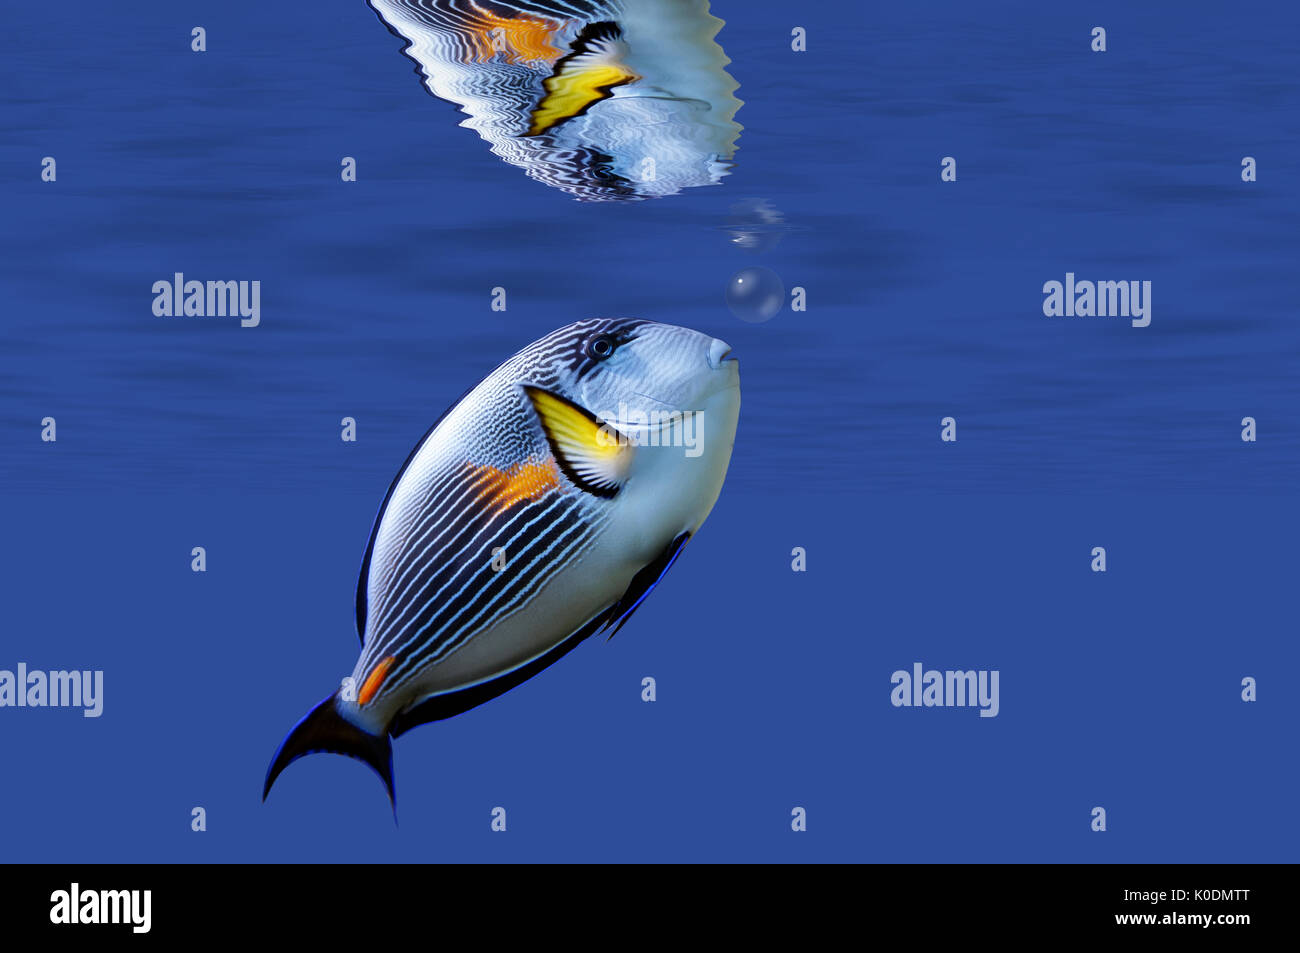 illustration of a tropical fish under surface Stock Photo